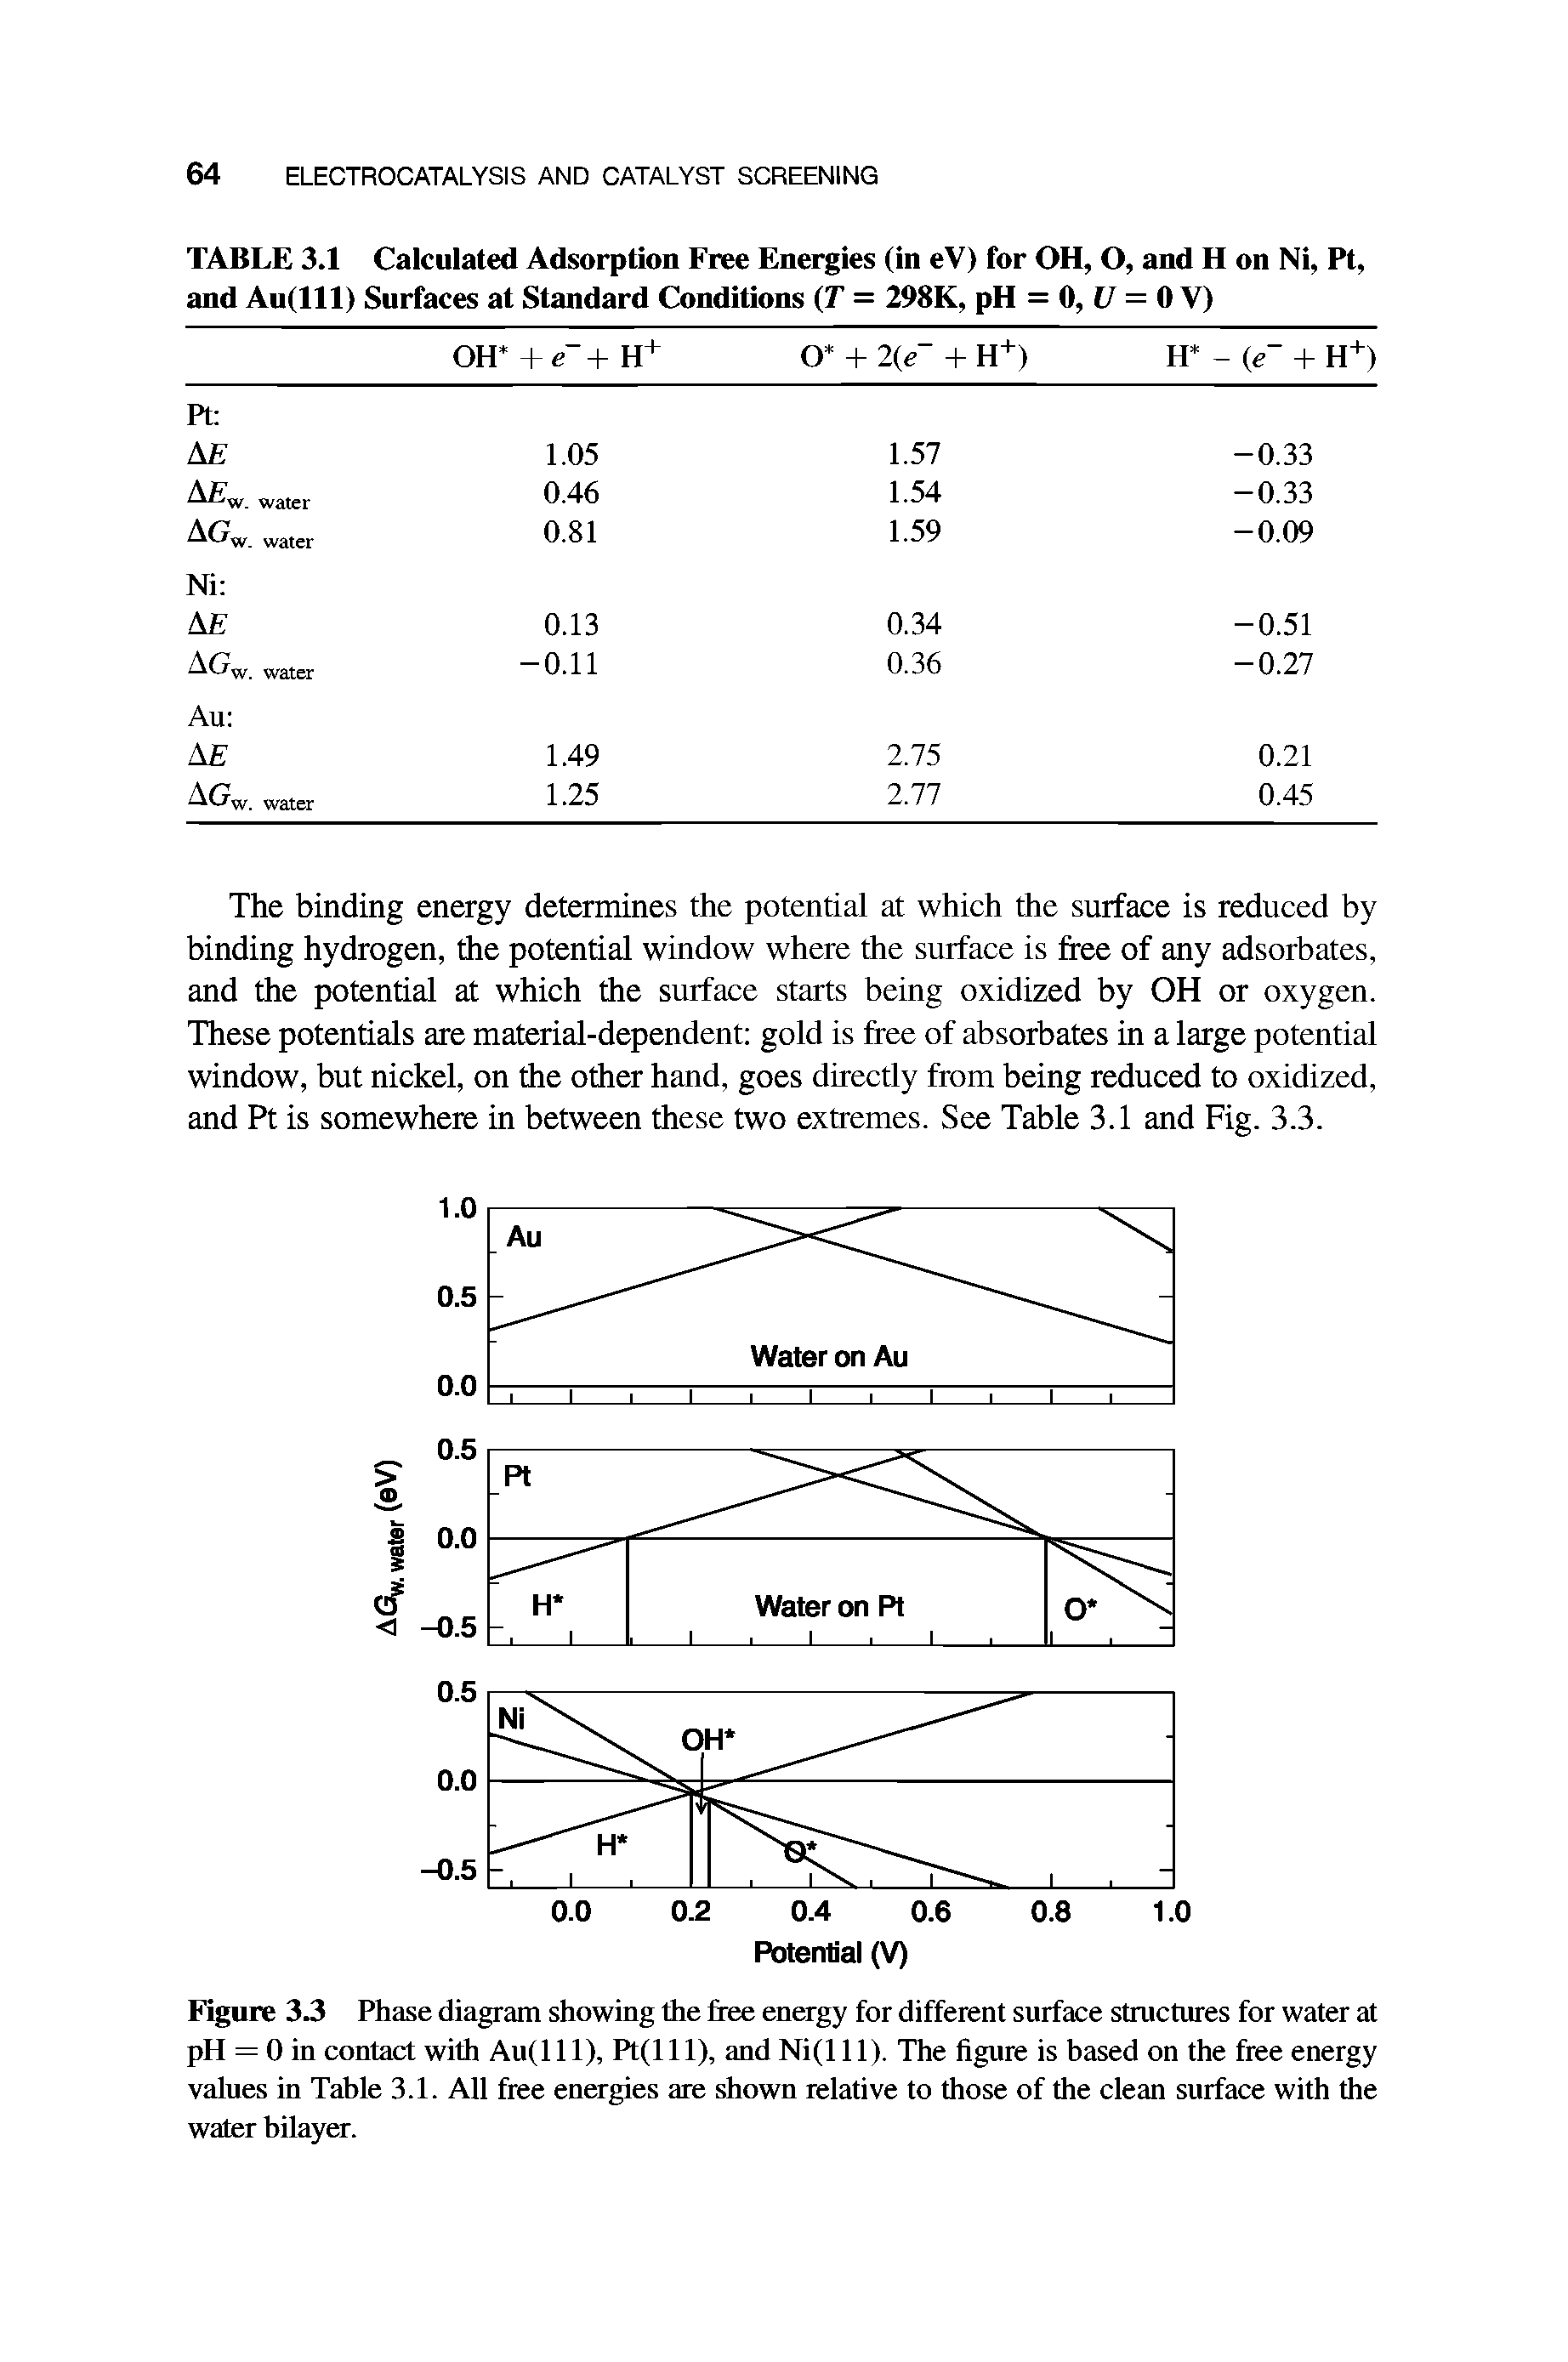 Figure 3.3 Phase diagram showing the free energy for different surface structures for water at pH = 0 in contact with Au(lll), Pt(lll), and Ni(lll). The figure is based on the free energy values in Table 3.1. All free energies are shown relative to those of the clean surface with the water bilayer.